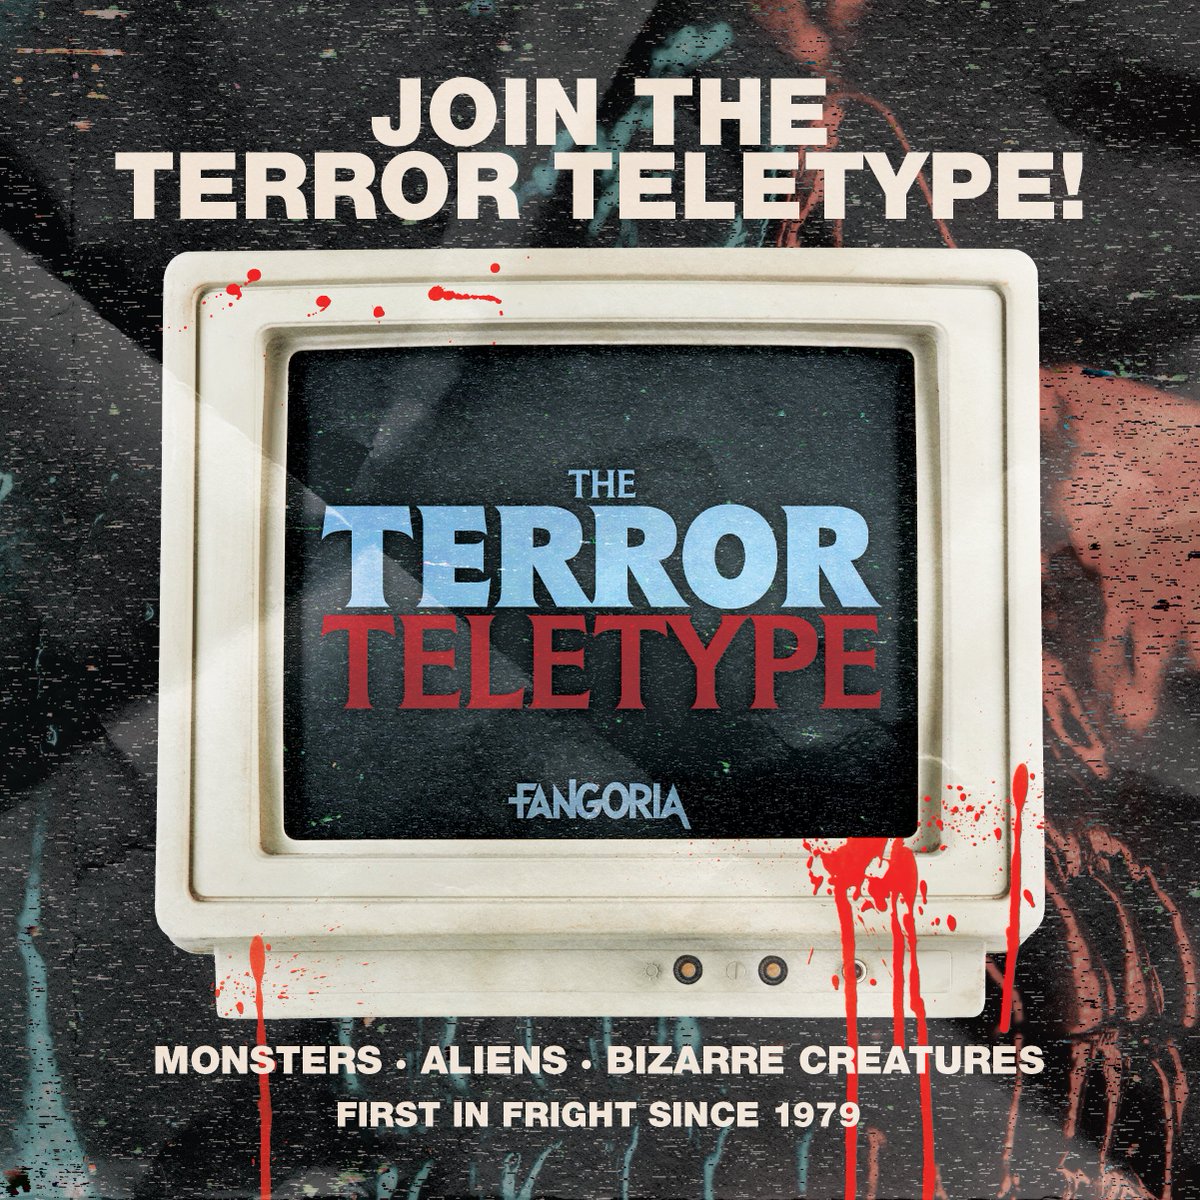 💀Don't miss the weekly TERROR TELETYPE newsletter. News, editorials, rare images from the Fango vault, special merch deals, and more! It's like getting a free mini issue of FANGORIA every week in your inbox. Join now: fangoria.com/terrorteletype…